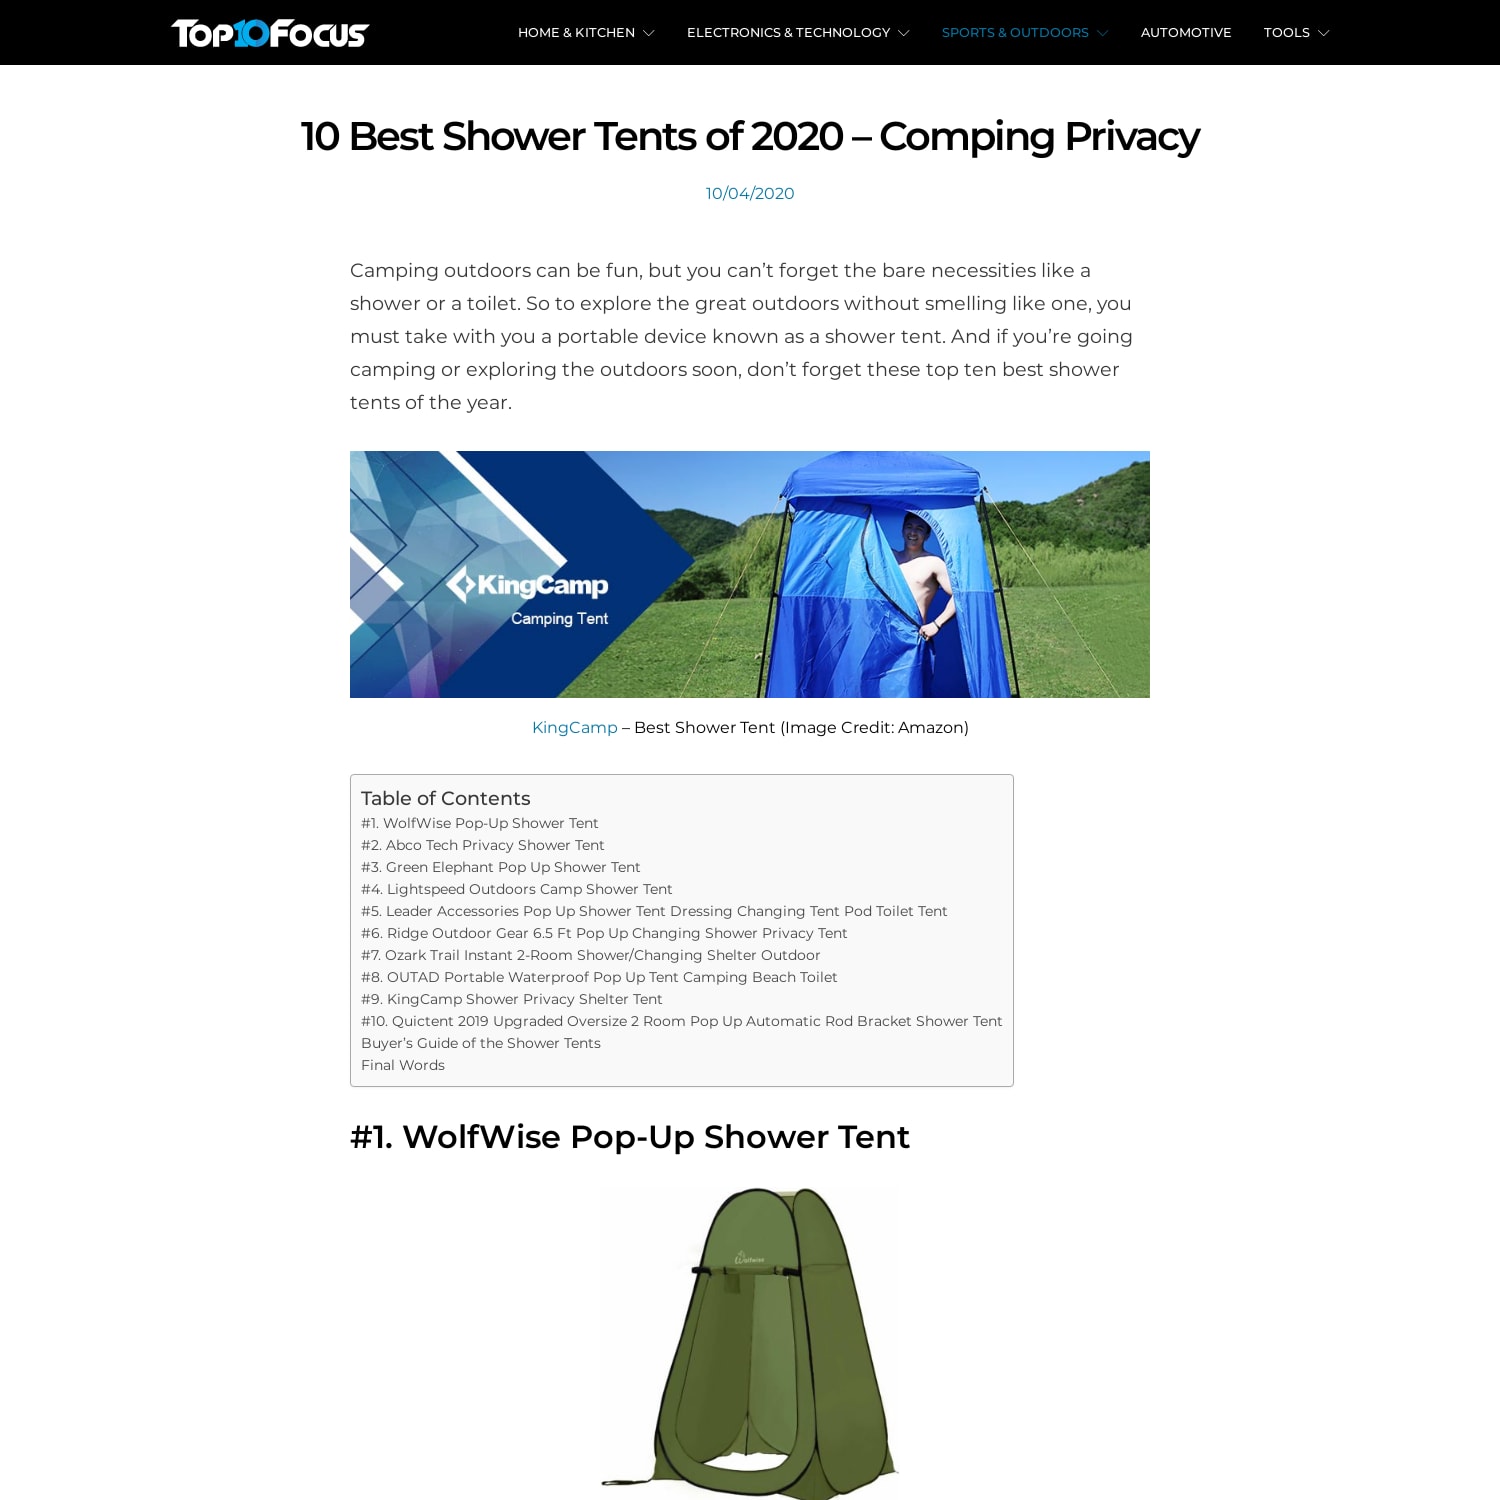 10 Best Shower Tents of 2020 - Comping Privacy